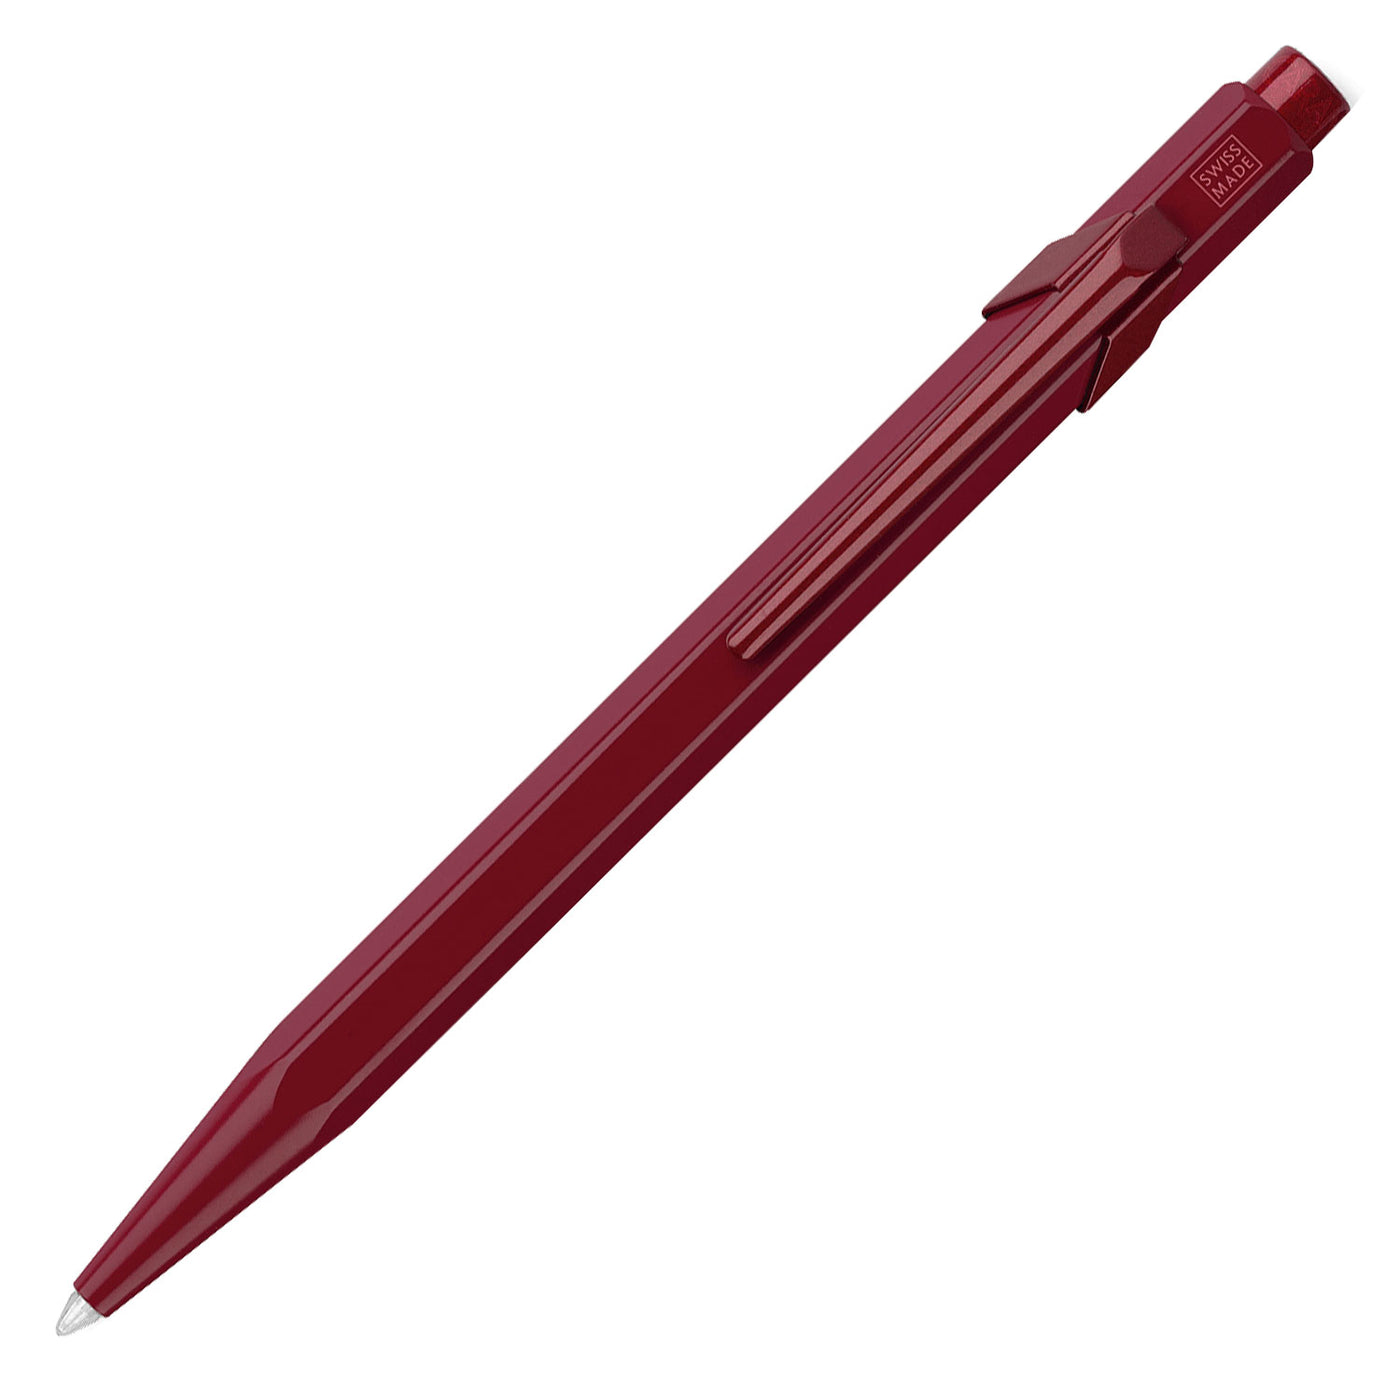 Caran d'Ache 849 Claim Your Style Ball Pen - Garnet Red (Limited Edition) 1